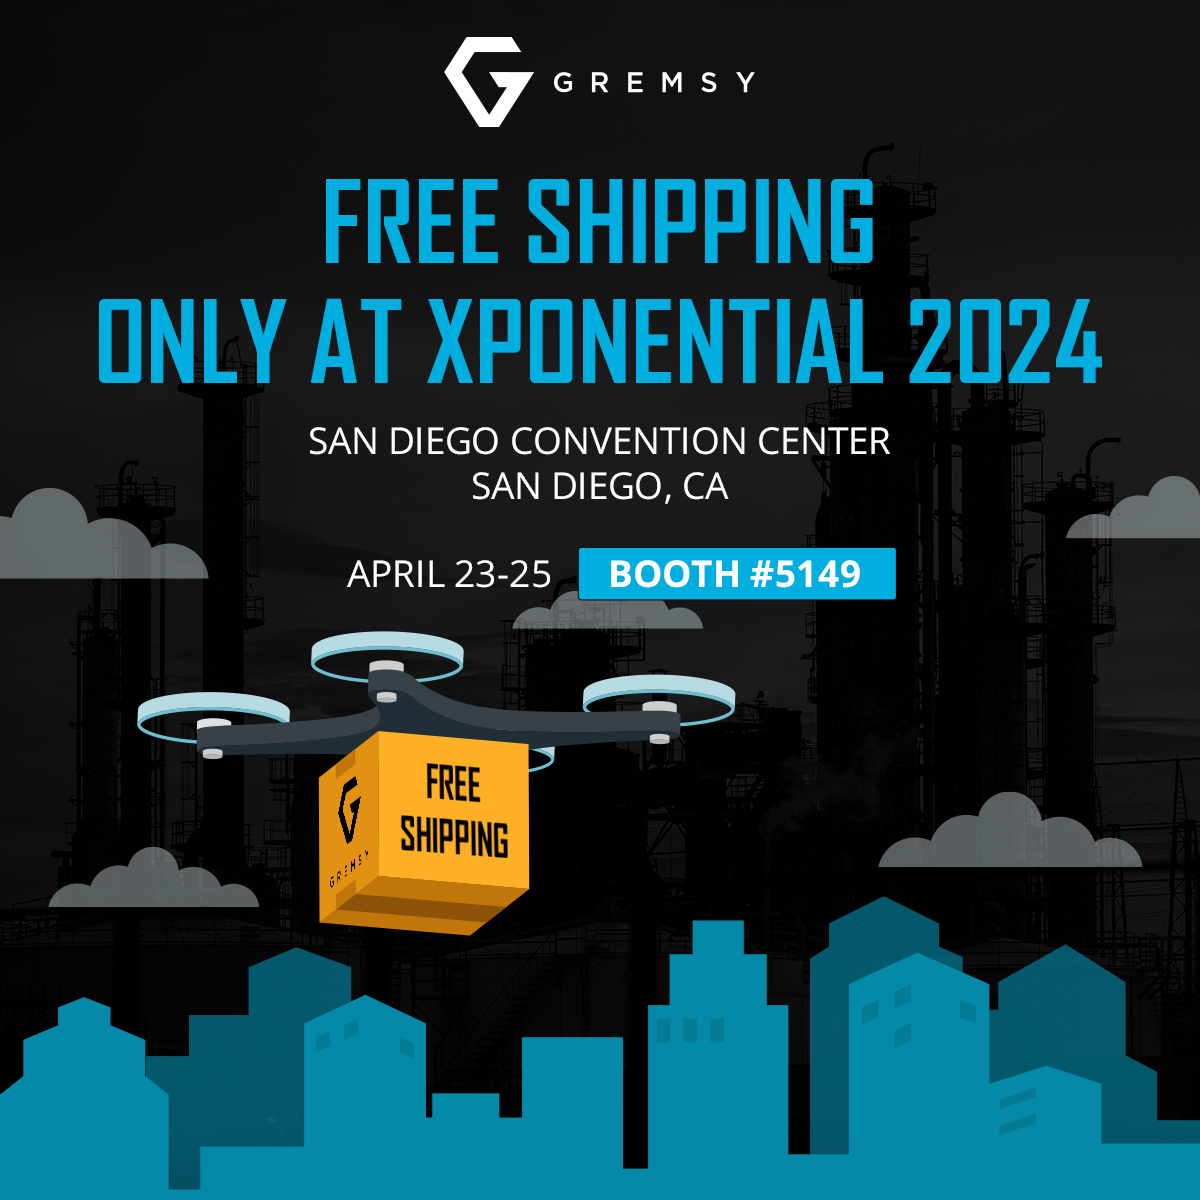 XPONENTIAL 2024 SPECIAL OFFER 👇

Gremsy offers FREE SHIPPING COUPONS for attendees.
Get a free hall pass below!

#Gremsy #Orus #SPort #XPO24 #Booth5149 #California